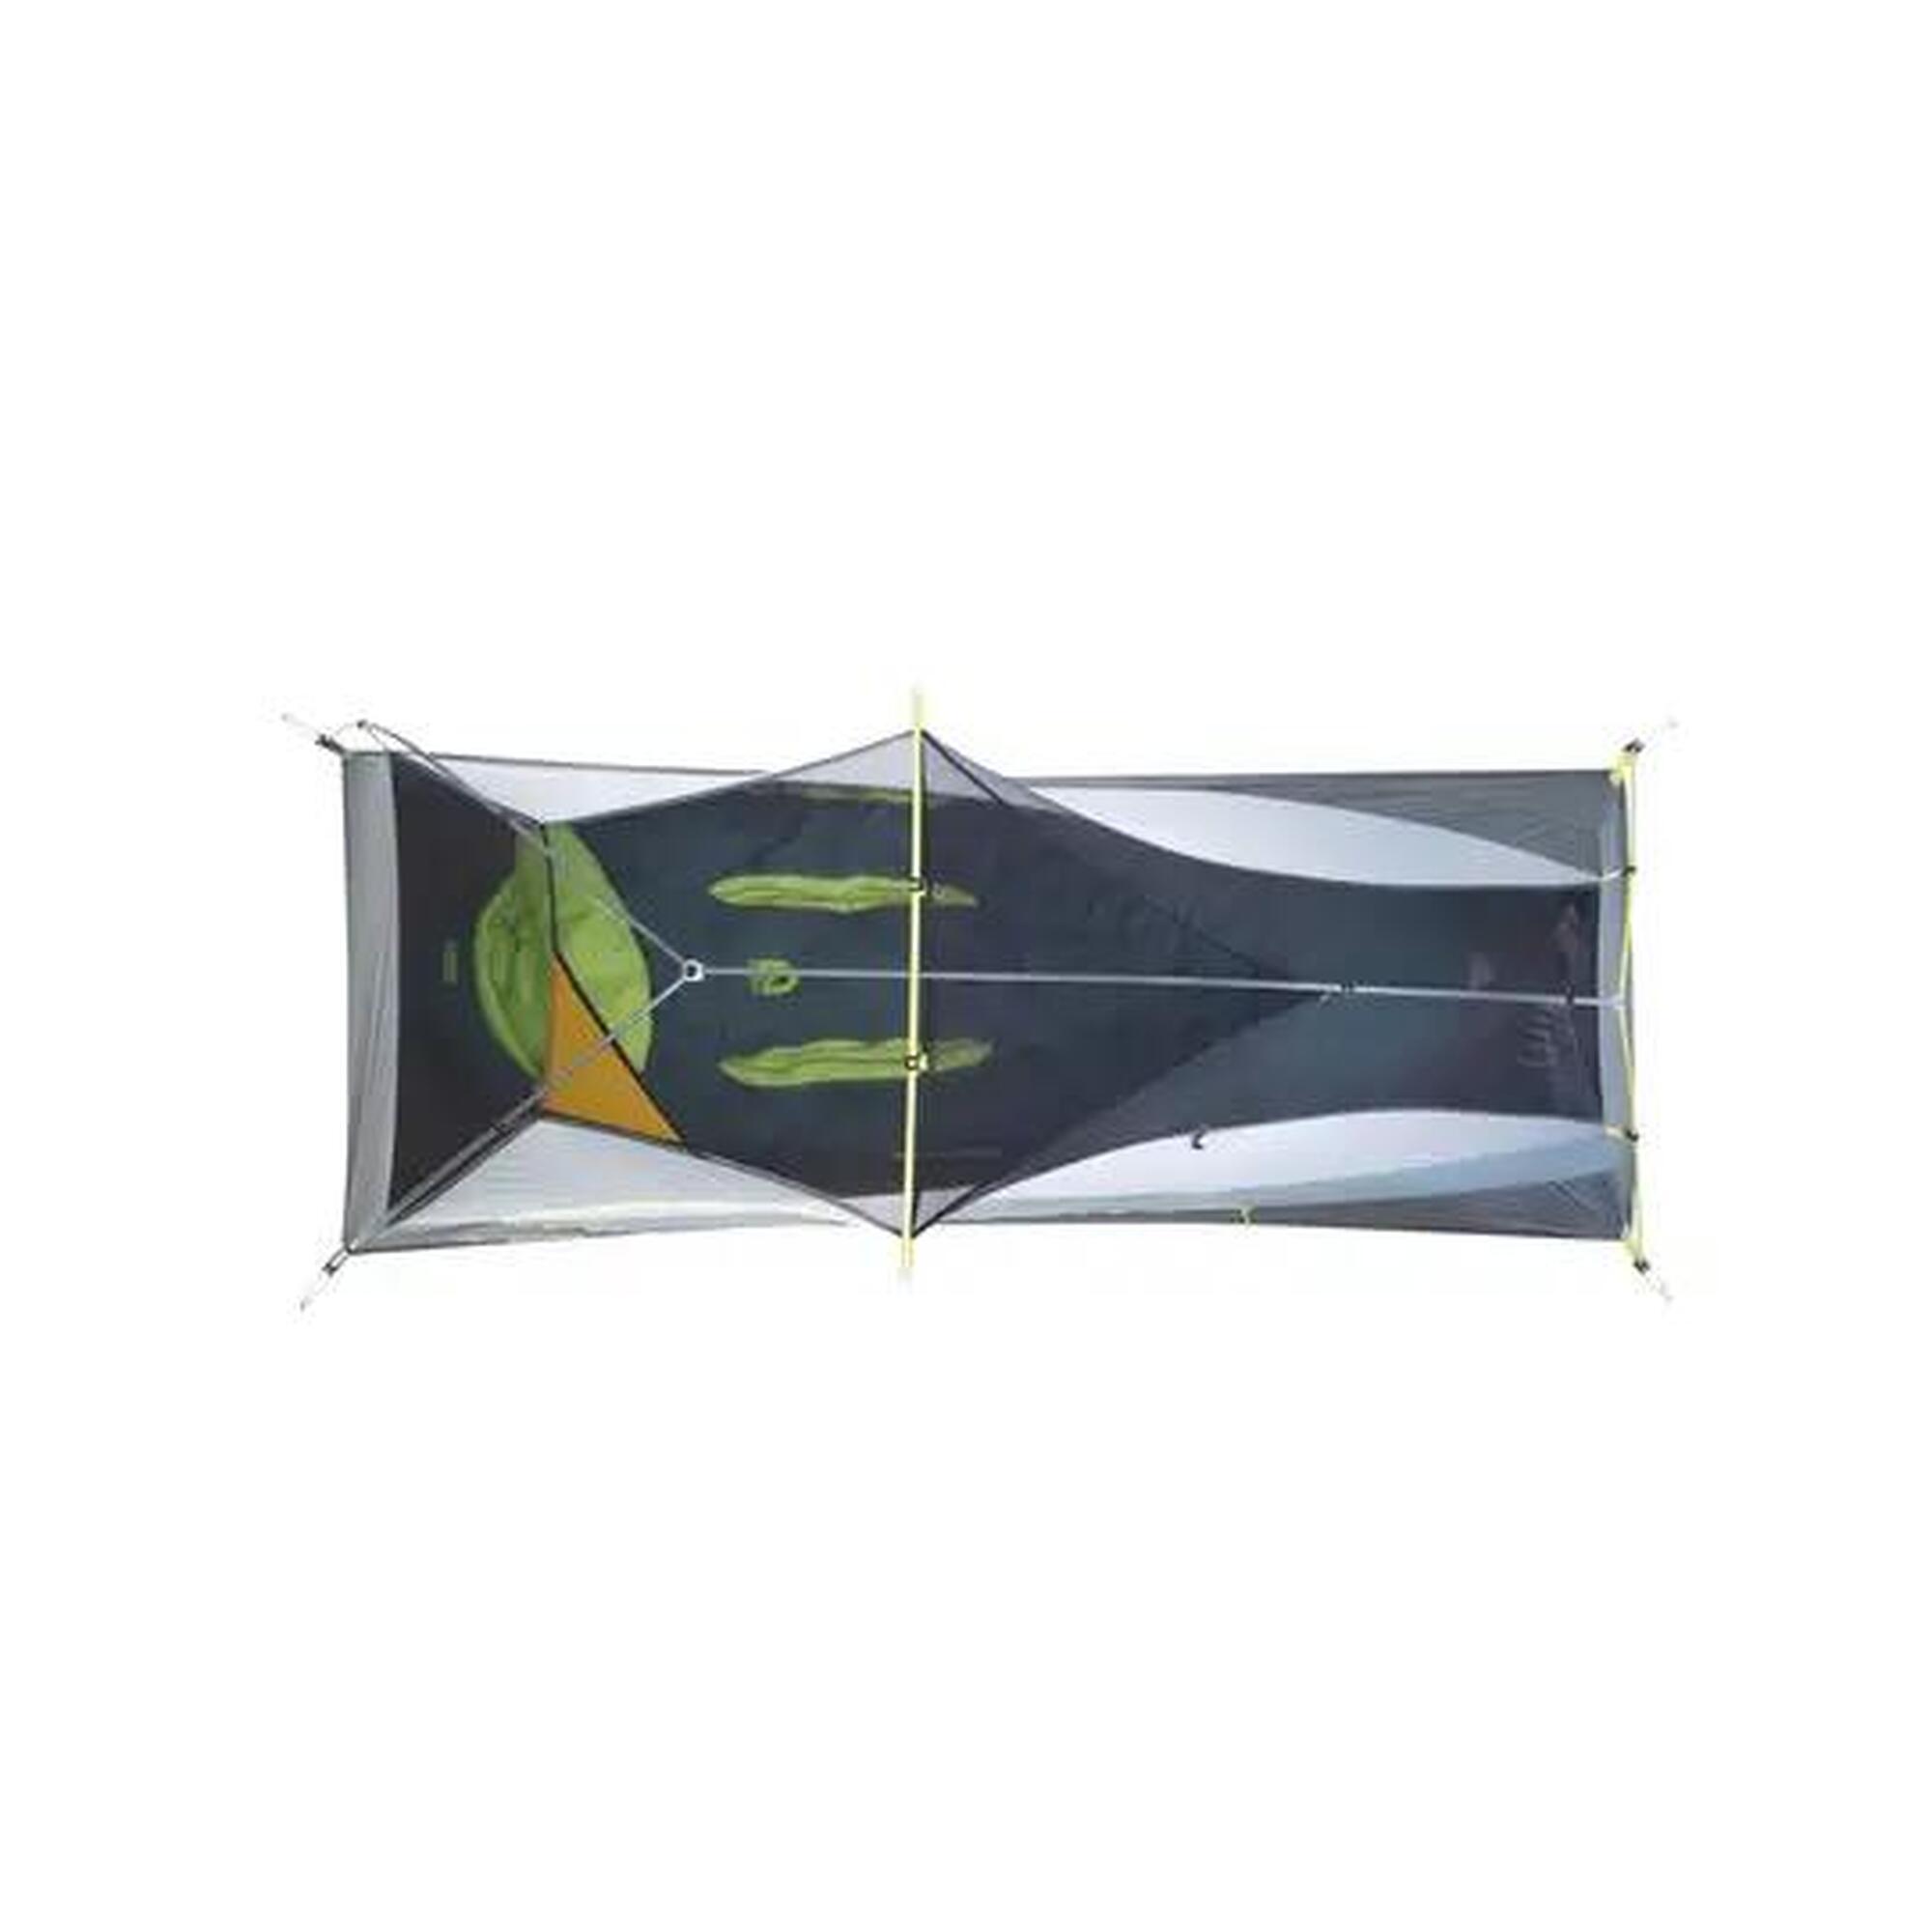 DRAGONFLY 1P TENT / Green